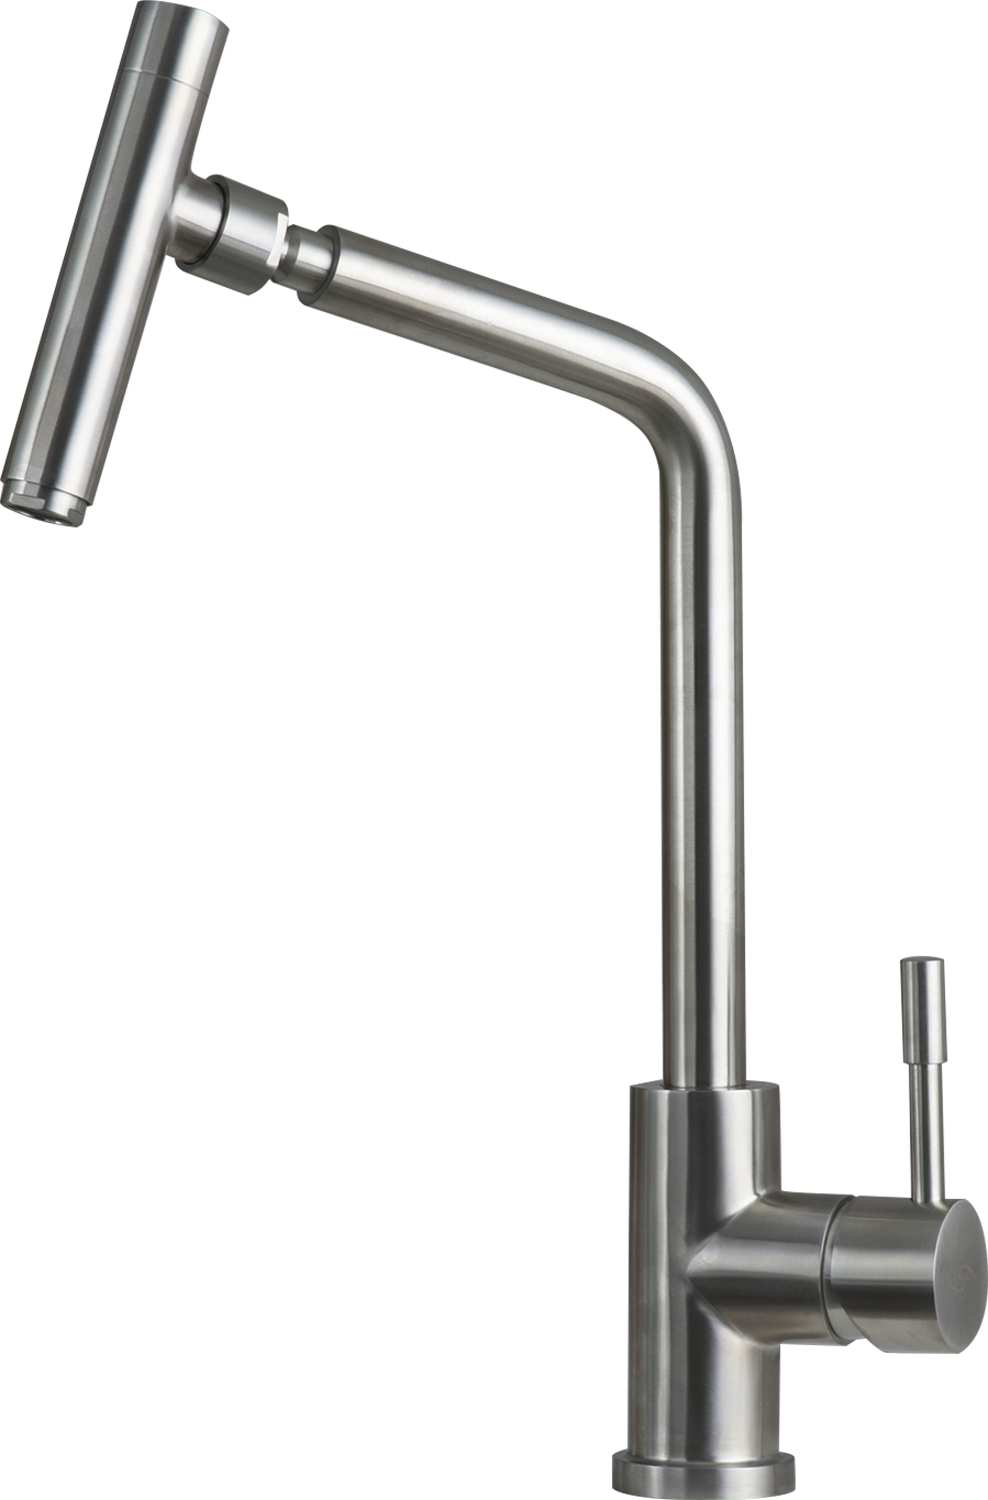 DAX Modern Single Handle Kitchen Faucet, Stainless Steel Body, Brushed Finish,  Size 10-5/16 x 16-1/2 Inches (DAX-70118)